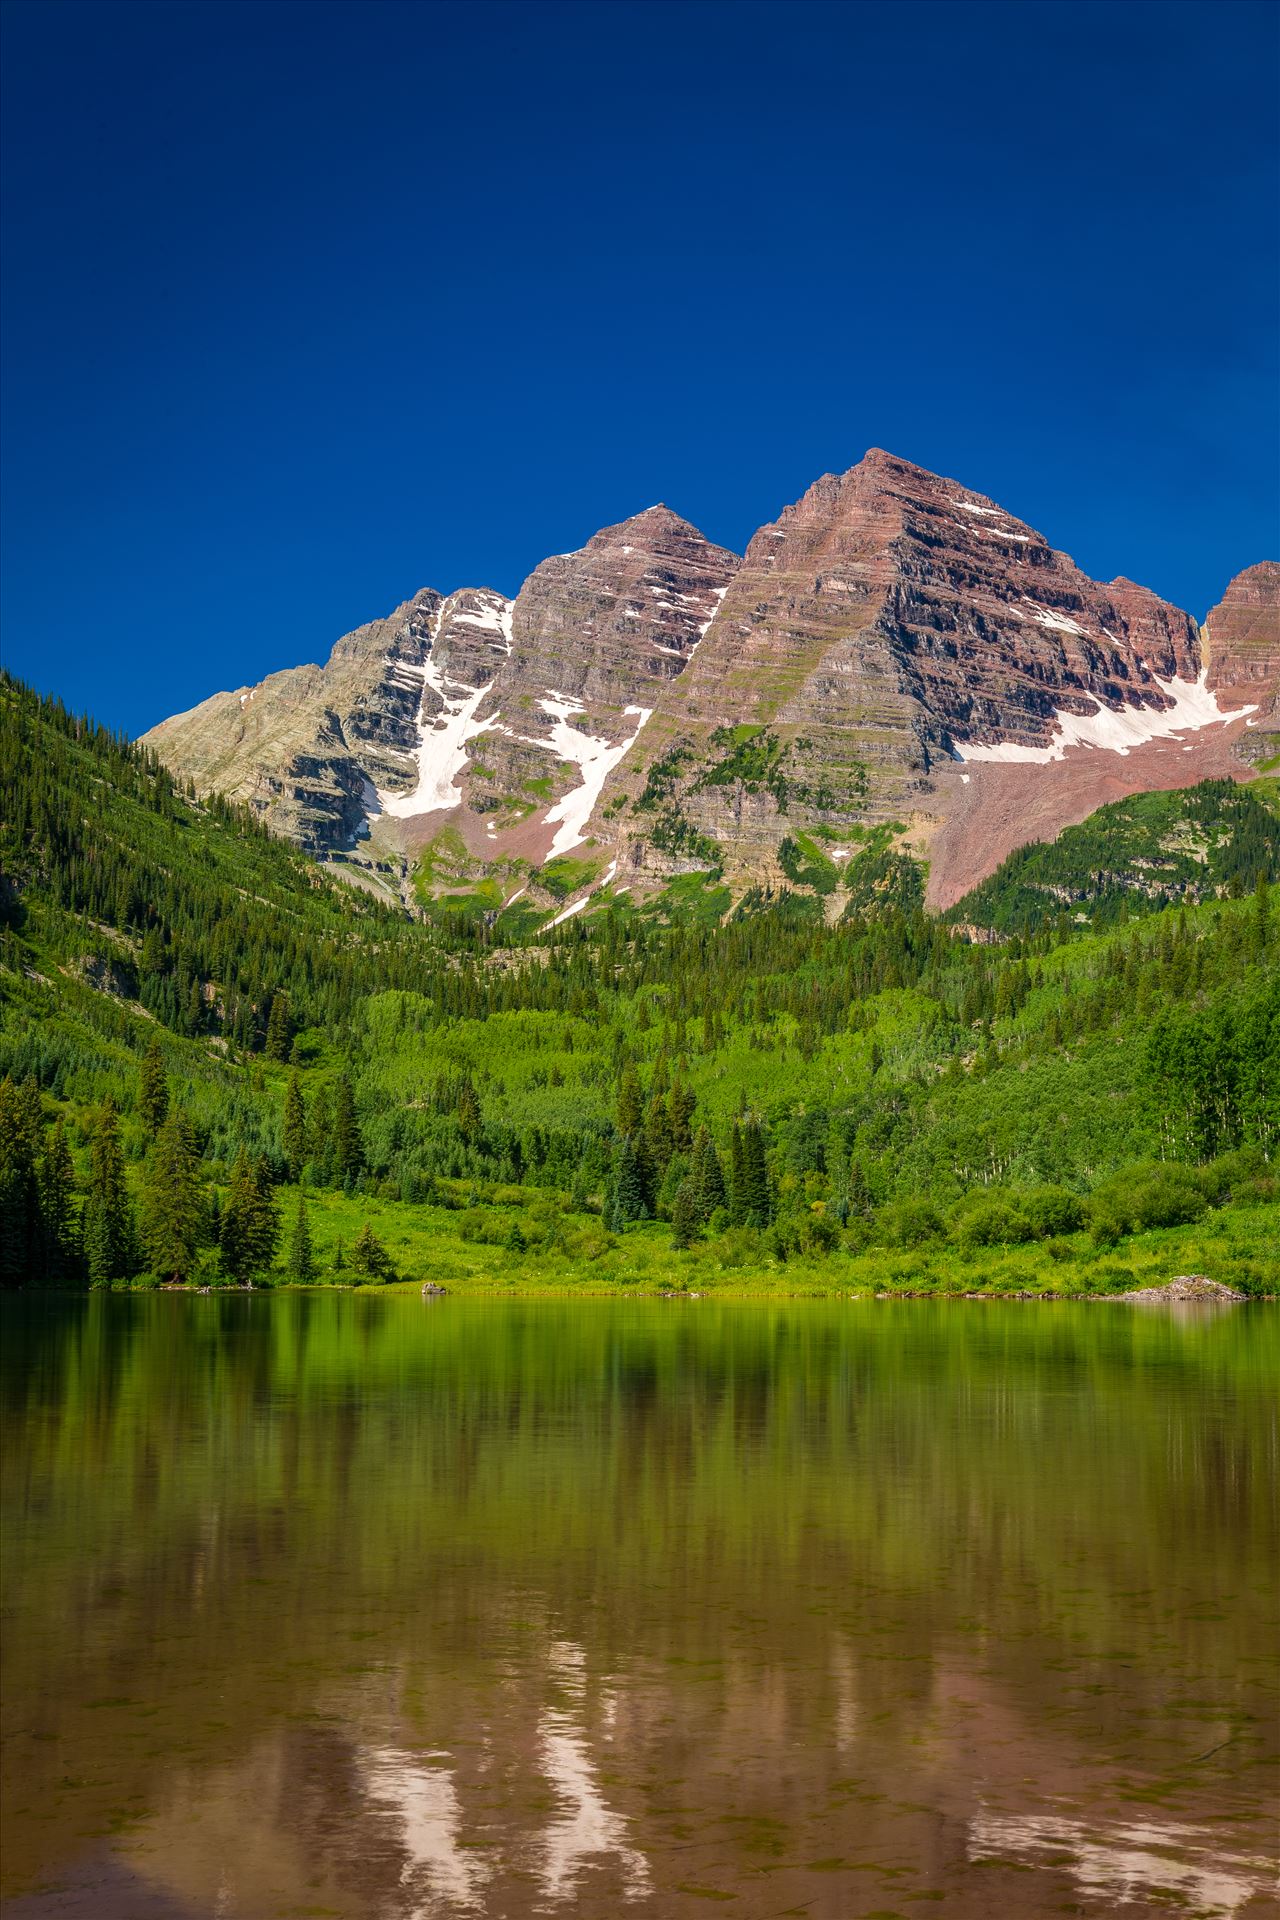 Maroon Bells in Summer No 07 - The remaining snow reflected in the water, at the Maroon Bells near Aspen, Colorado. by Scott Smith Photos